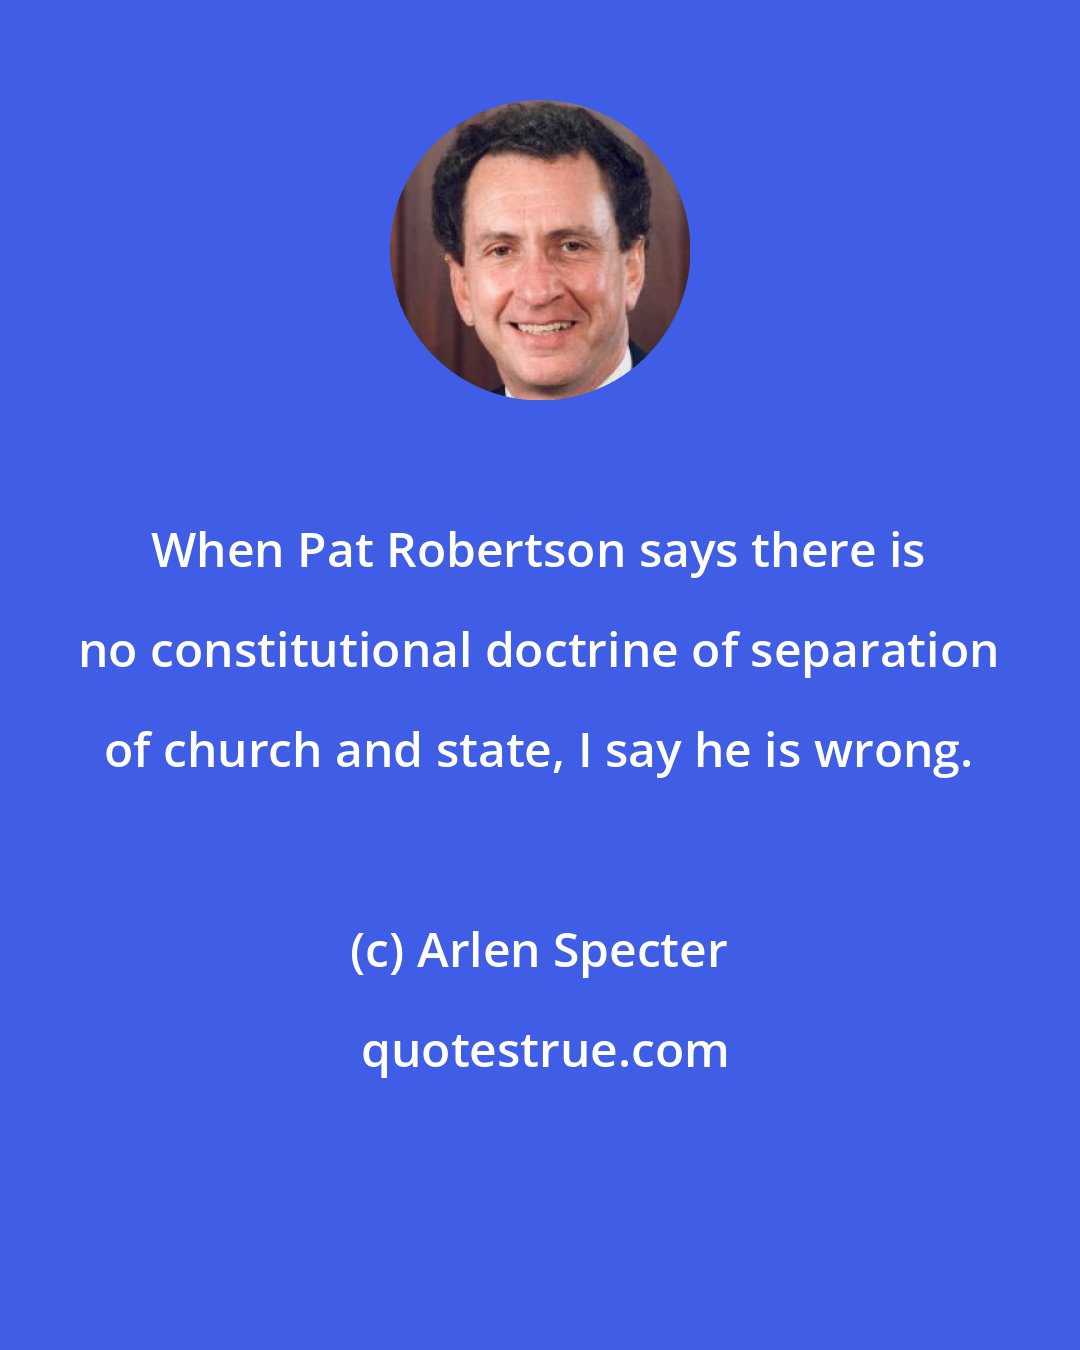 Arlen Specter: When Pat Robertson says there is no constitutional doctrine of separation of church and state, I say he is wrong.